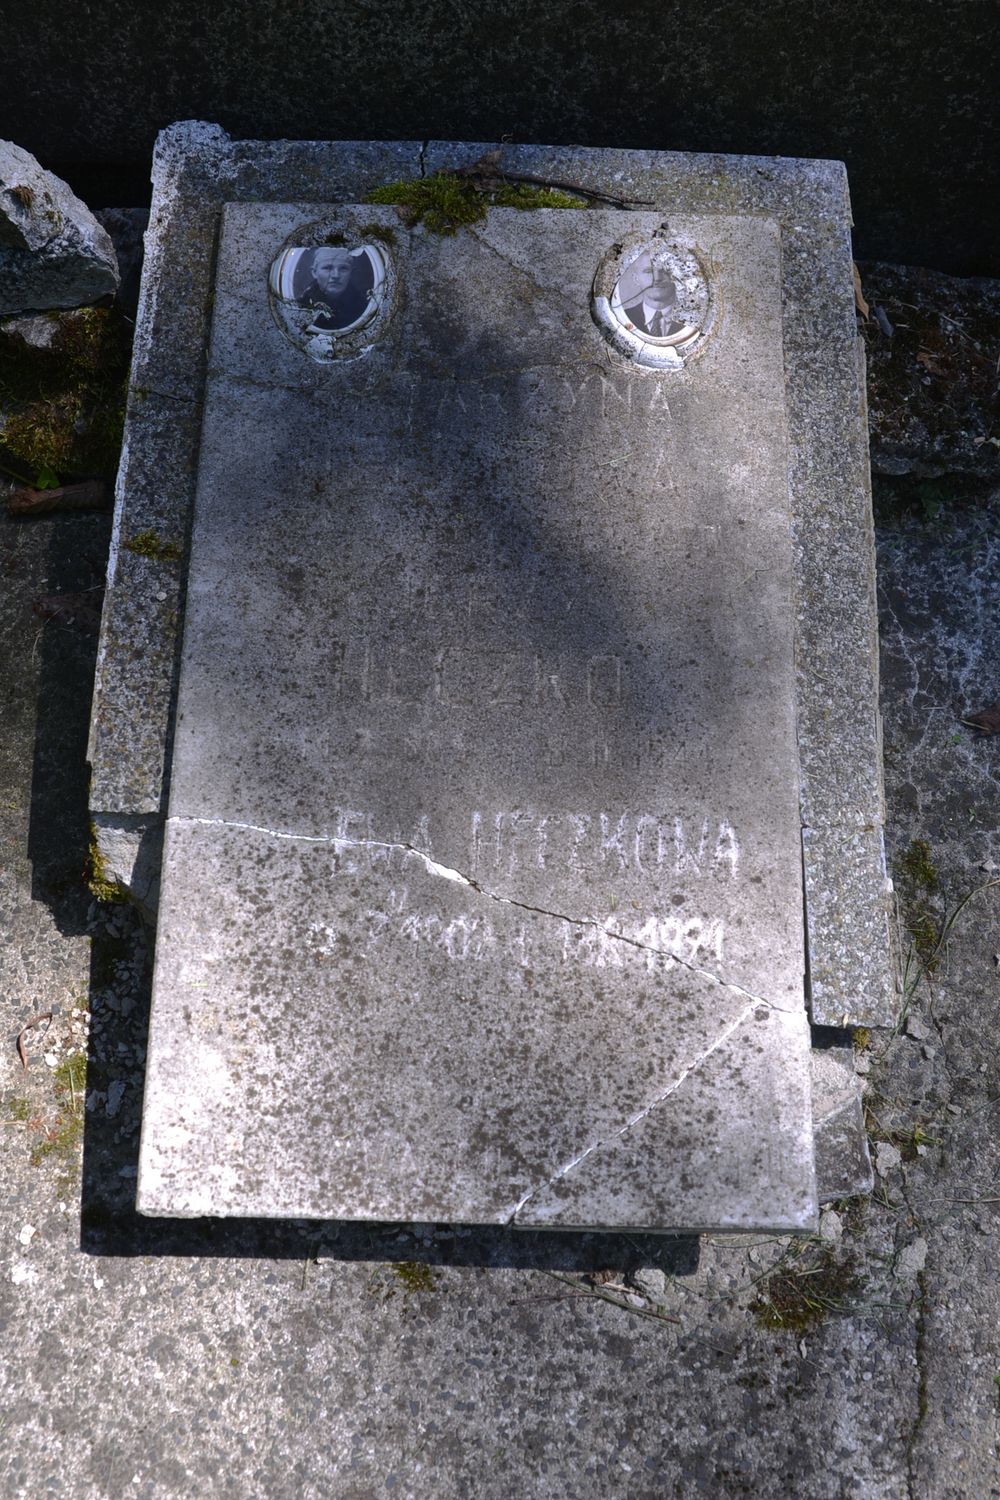 Inscription plaque from the tomb of Eve, George and Catherine Heczek, cemetery in Karviná Mexico, Czech Republic, as of 2022